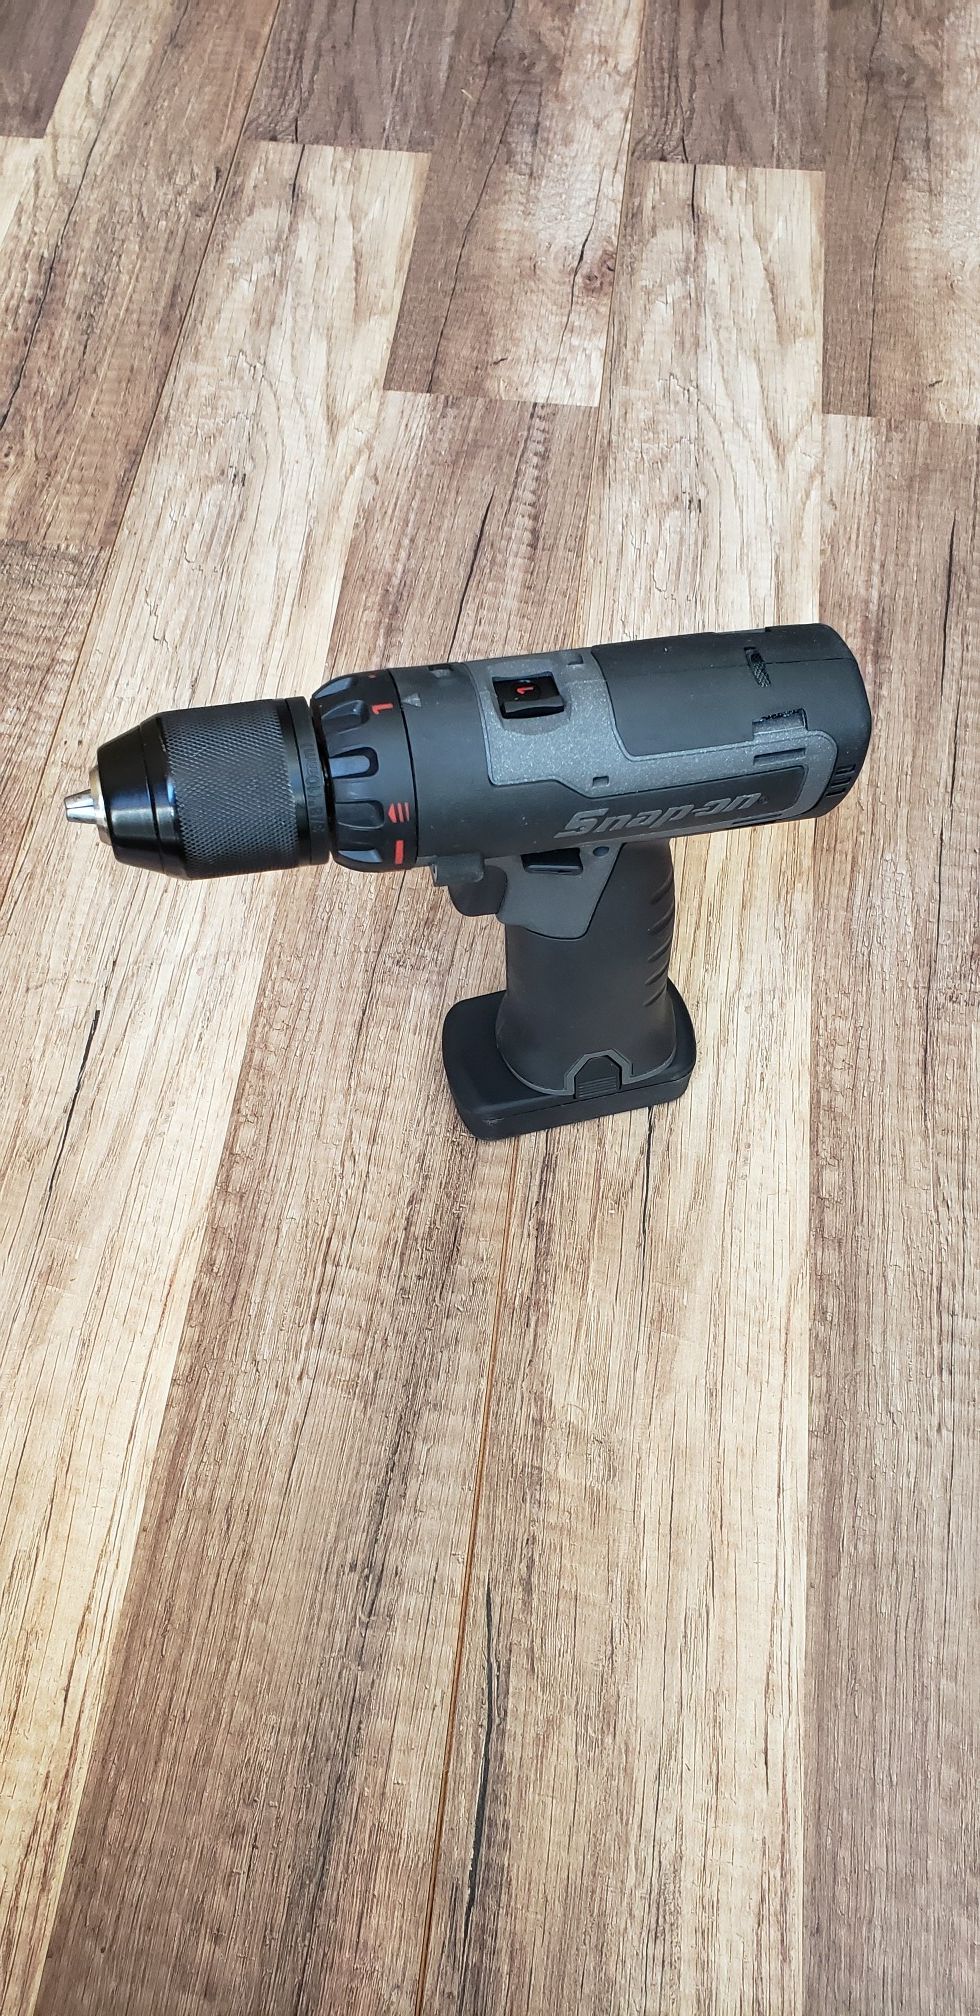 Snap—On 14.4v MicroLithium cordless drill tool/ Battery (Like New)